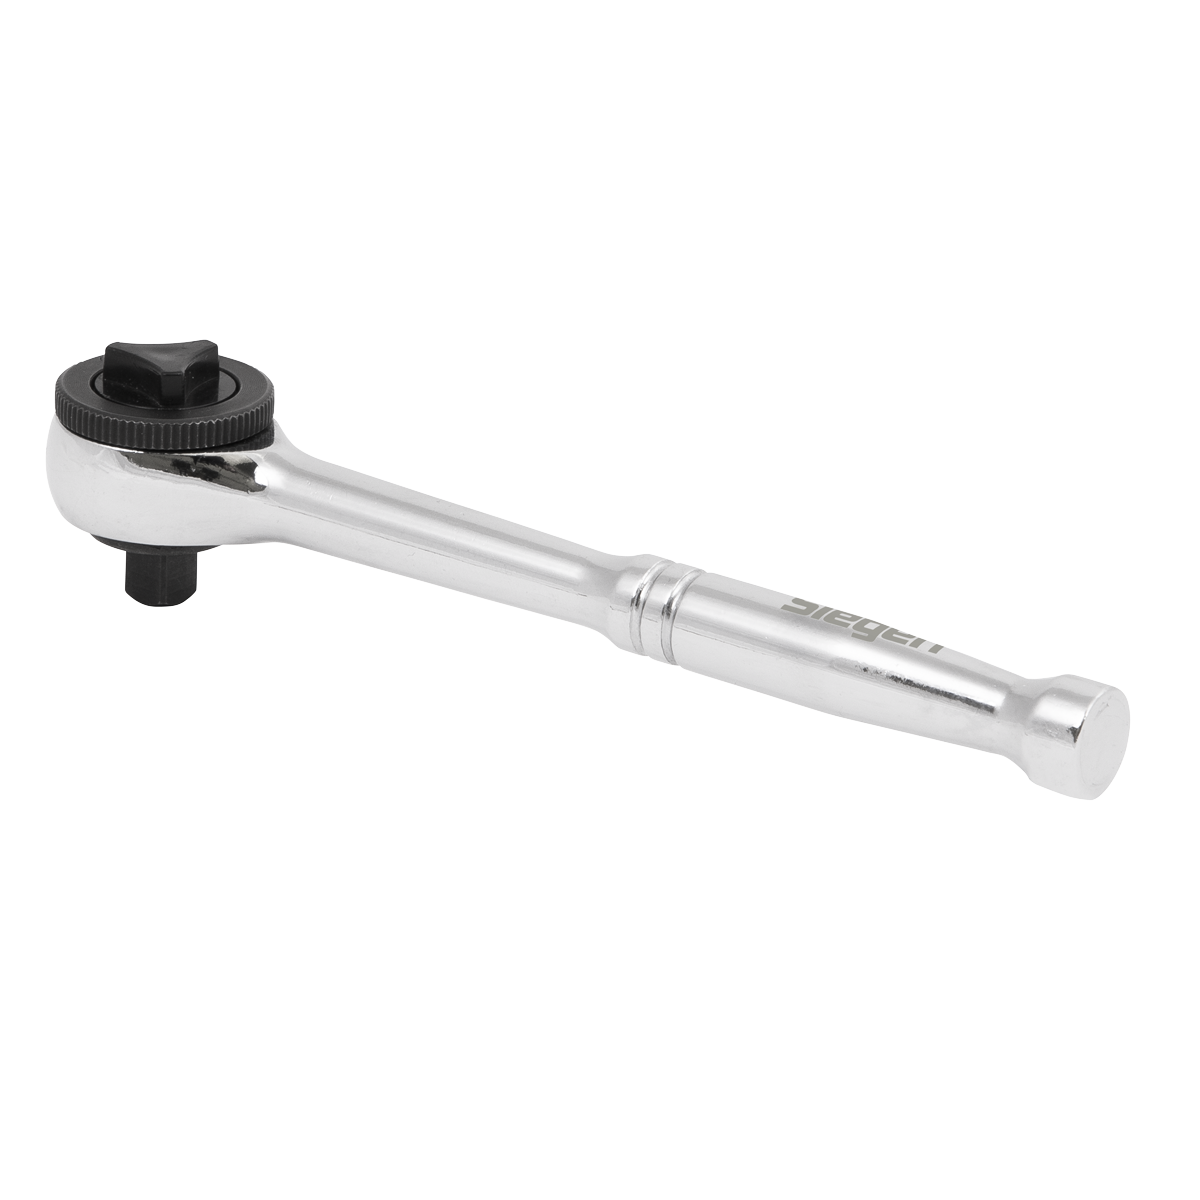 Ratchet Wrench 1/4"Sq Drive - S0506 - Farming Parts